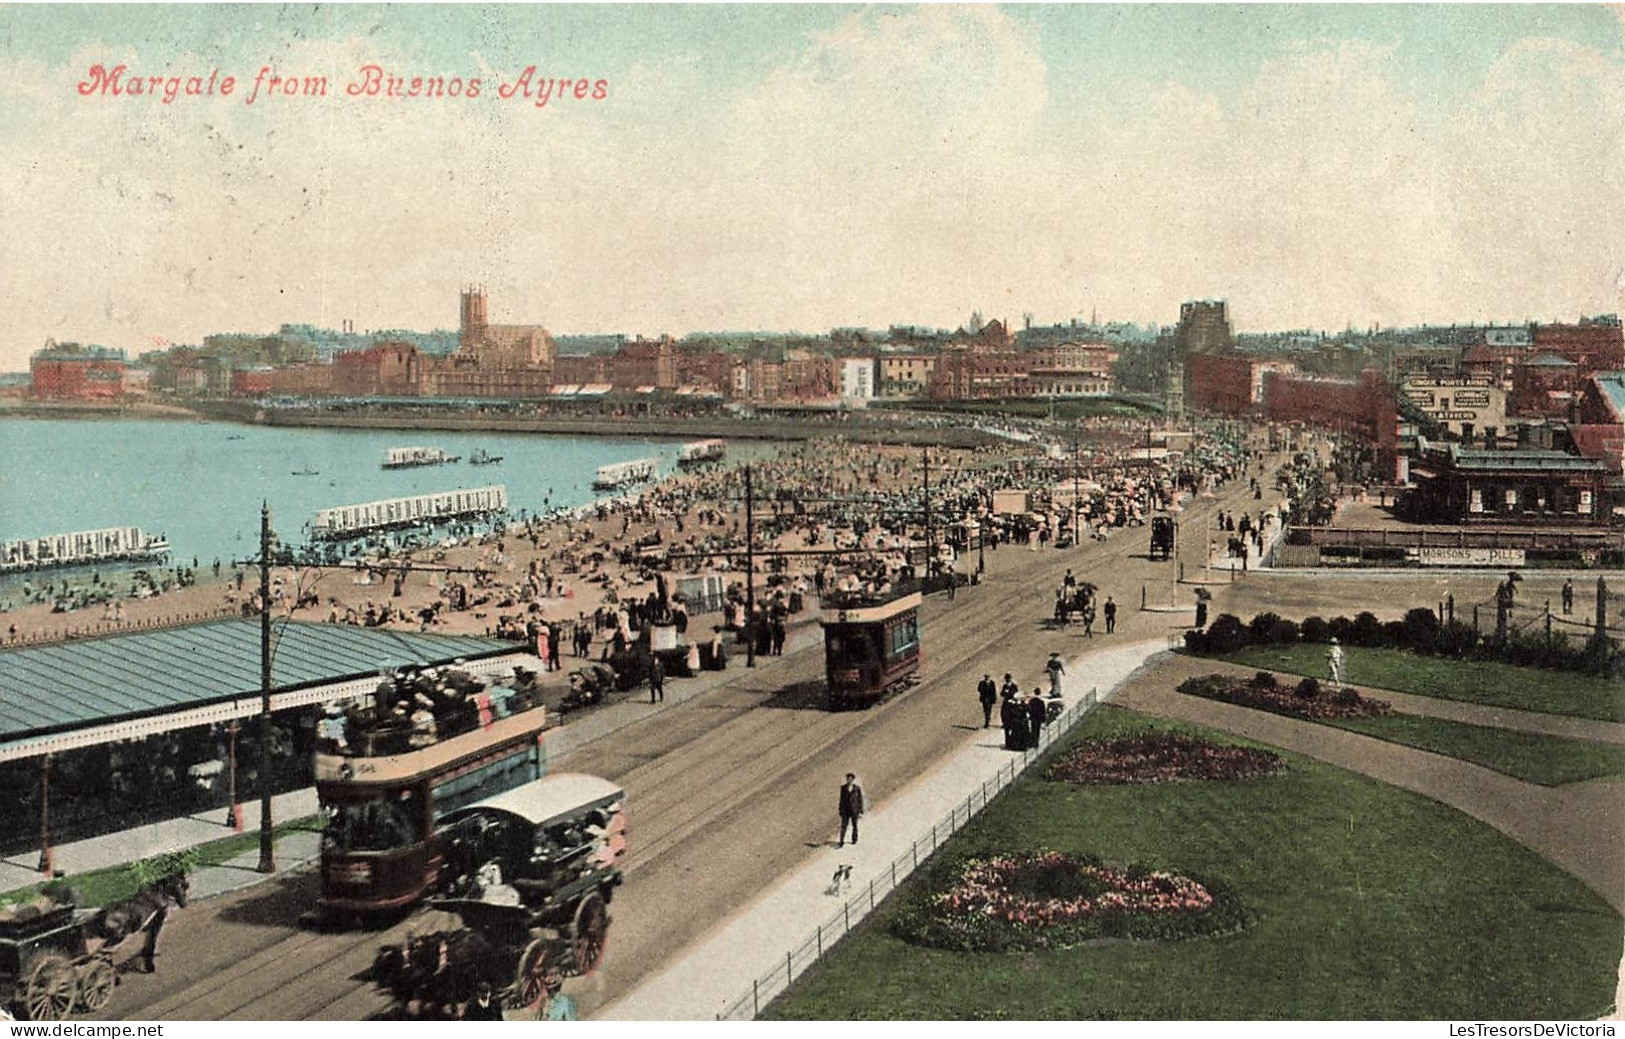 ROYAUME-UNI - Angleterre - Margate - From Buenos Ayres - Carte Postale Ancienne - Margate